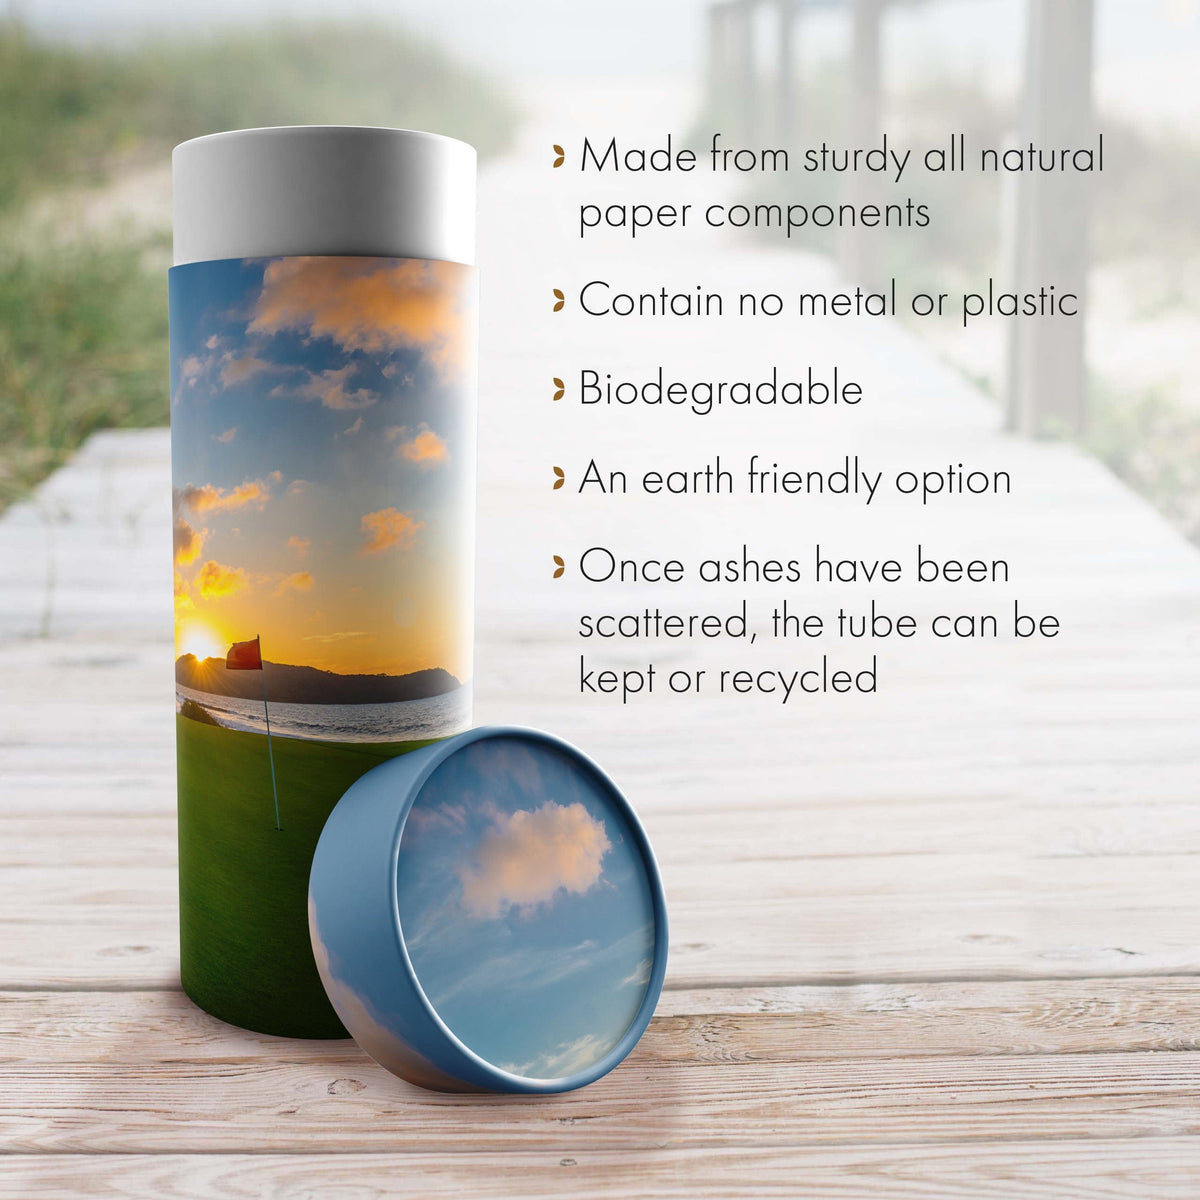 Commemorative Cremation Urns 19th Hole Golf Biodegradable &amp; Eco Friendly Burial or Scattering Urn / Tube